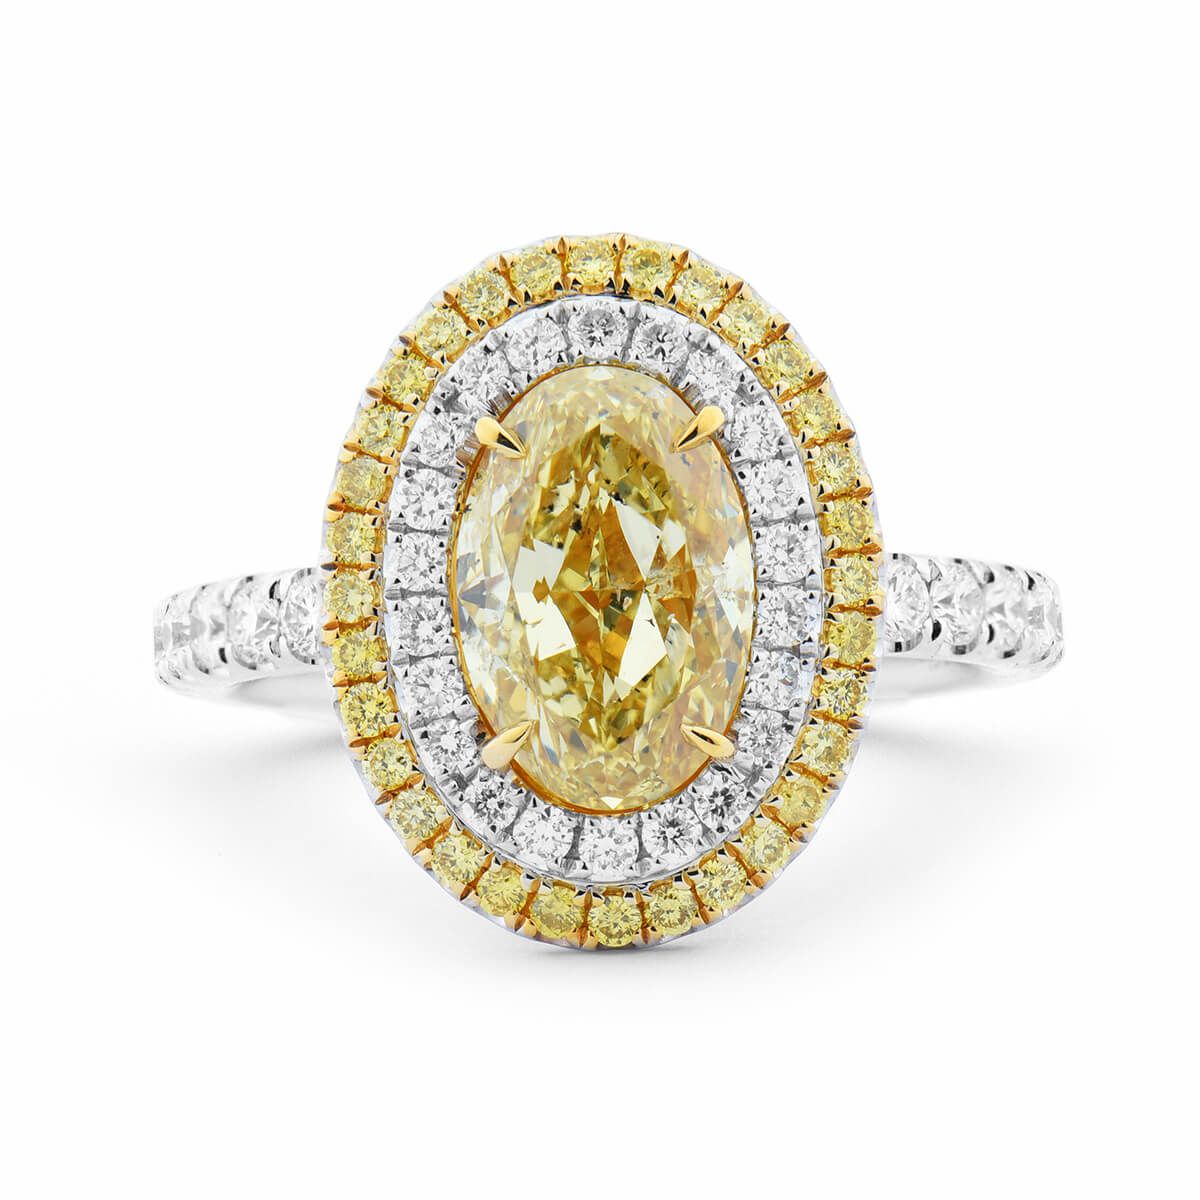 Fancy Yellow Diamond Ring, 2.00 Ct. (2.88 Ct. TW), Oval shape, GIA Certified, 2186382353